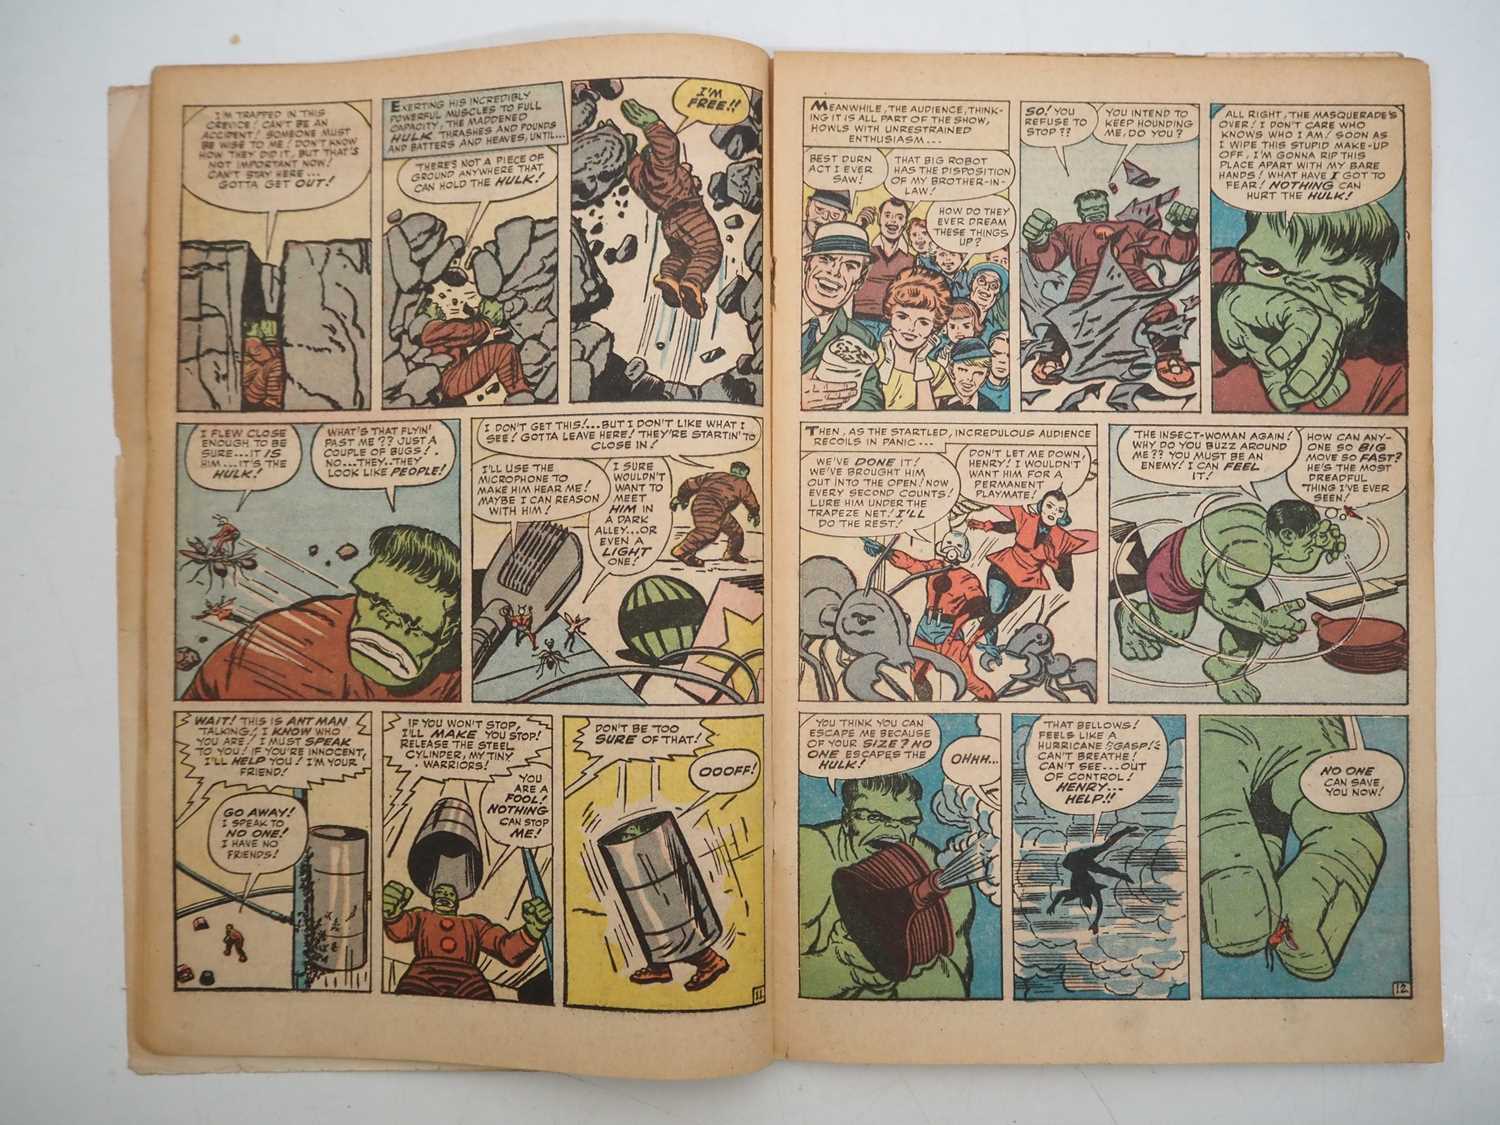 AVENGERS #1 - (1963 - MARVEL - UK Price Variant) - KEY Comic Book - First appearance of the Avengers - Image 15 of 29